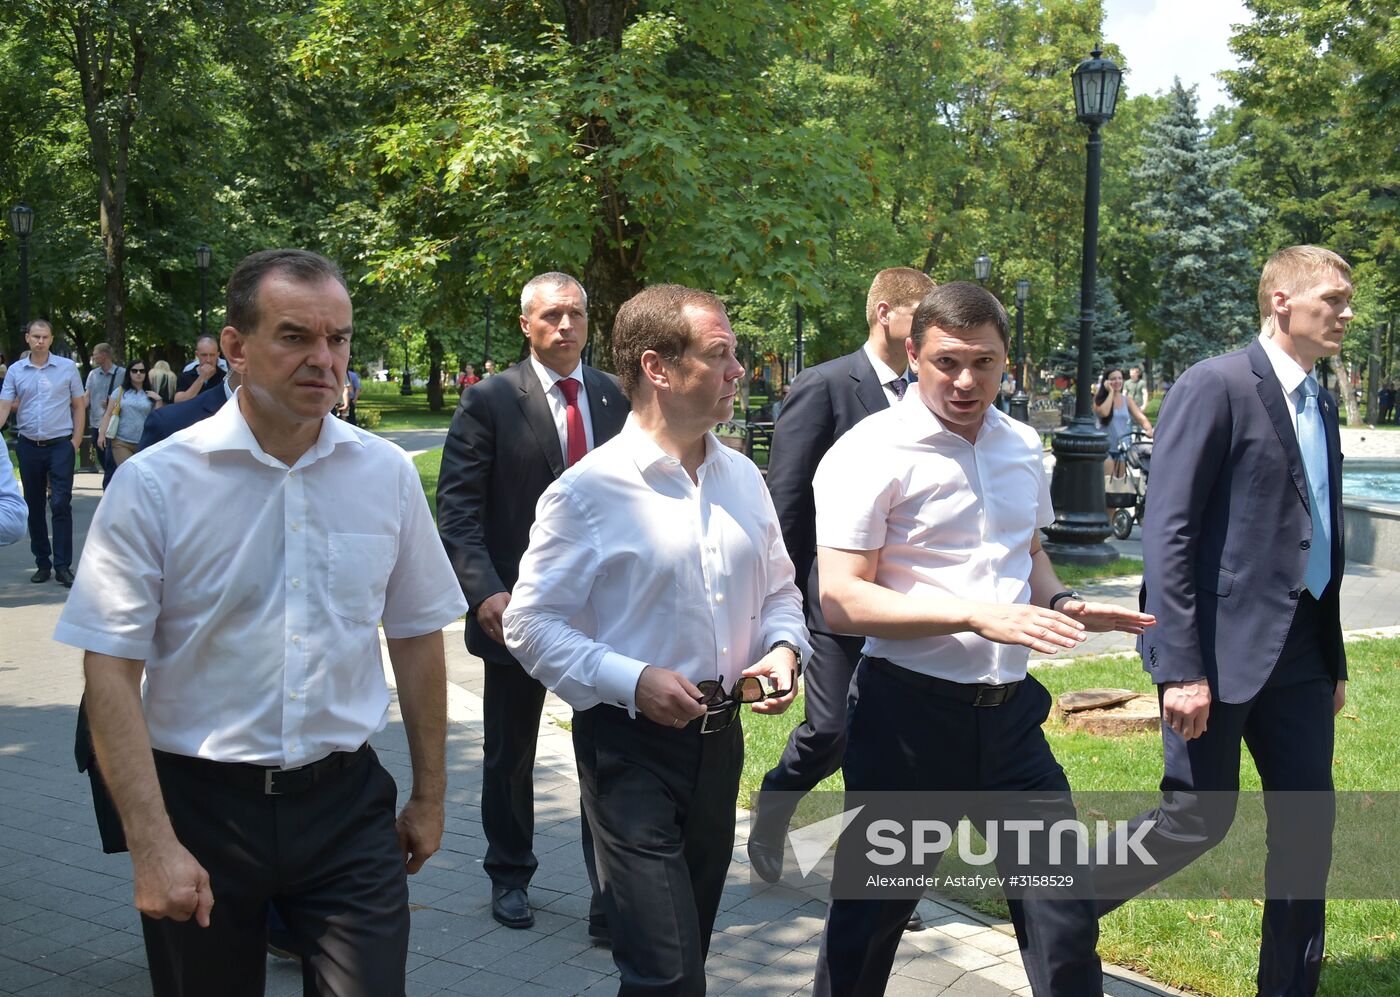 Russian Prime Minister Dmitry Medvedev visits Southern Federal District